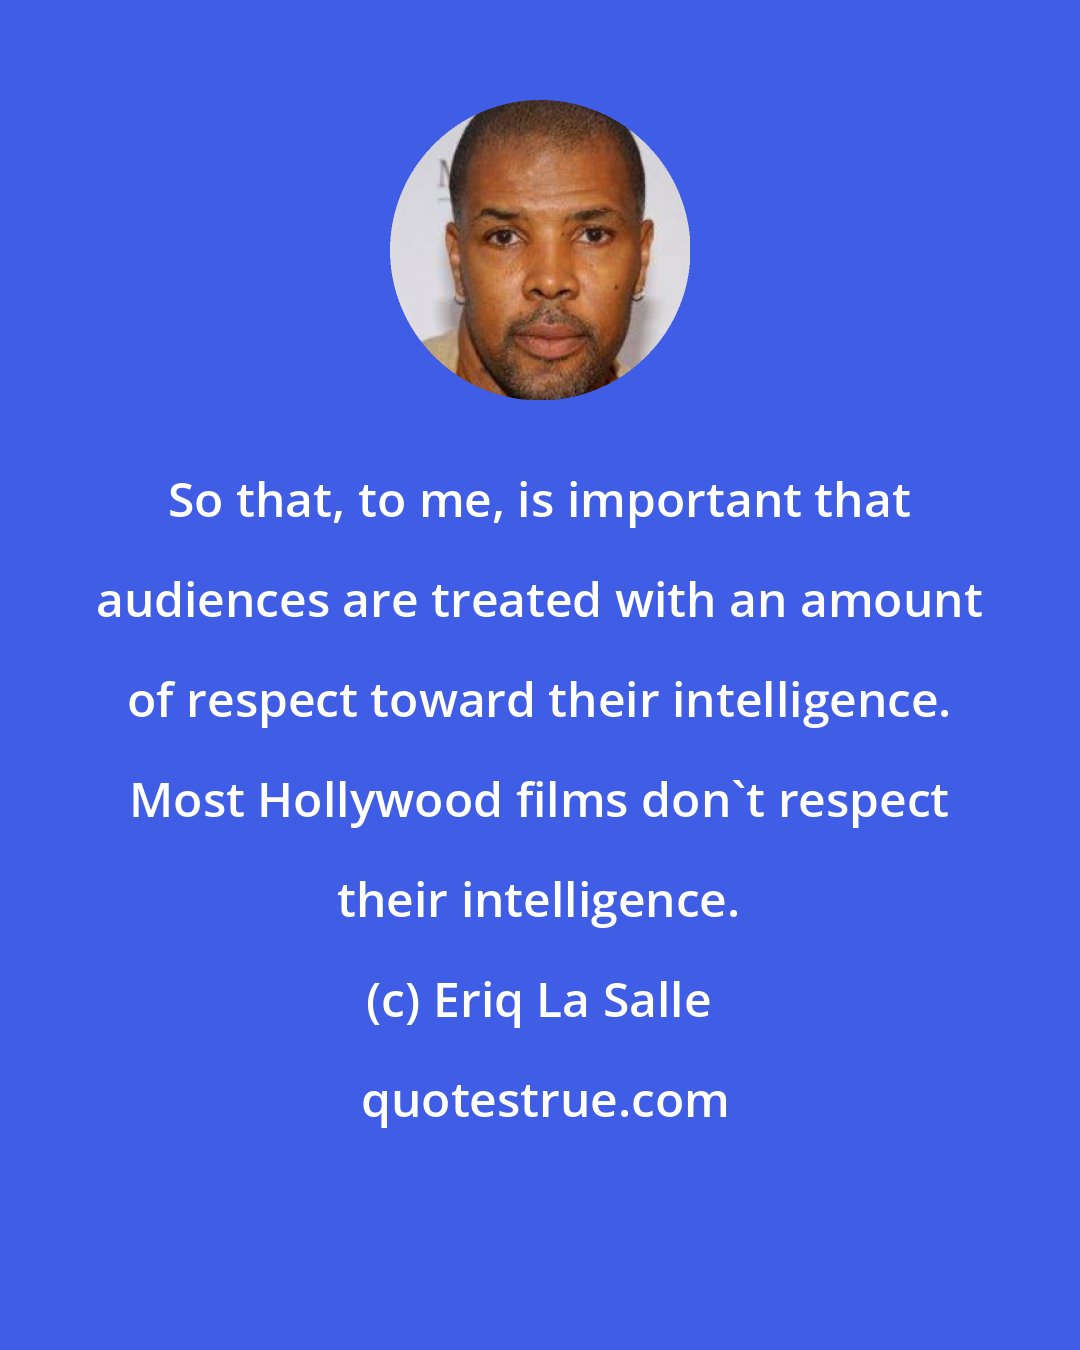 Eriq La Salle: So that, to me, is important that audiences are treated with an amount of respect toward their intelligence. Most Hollywood films don't respect their intelligence.